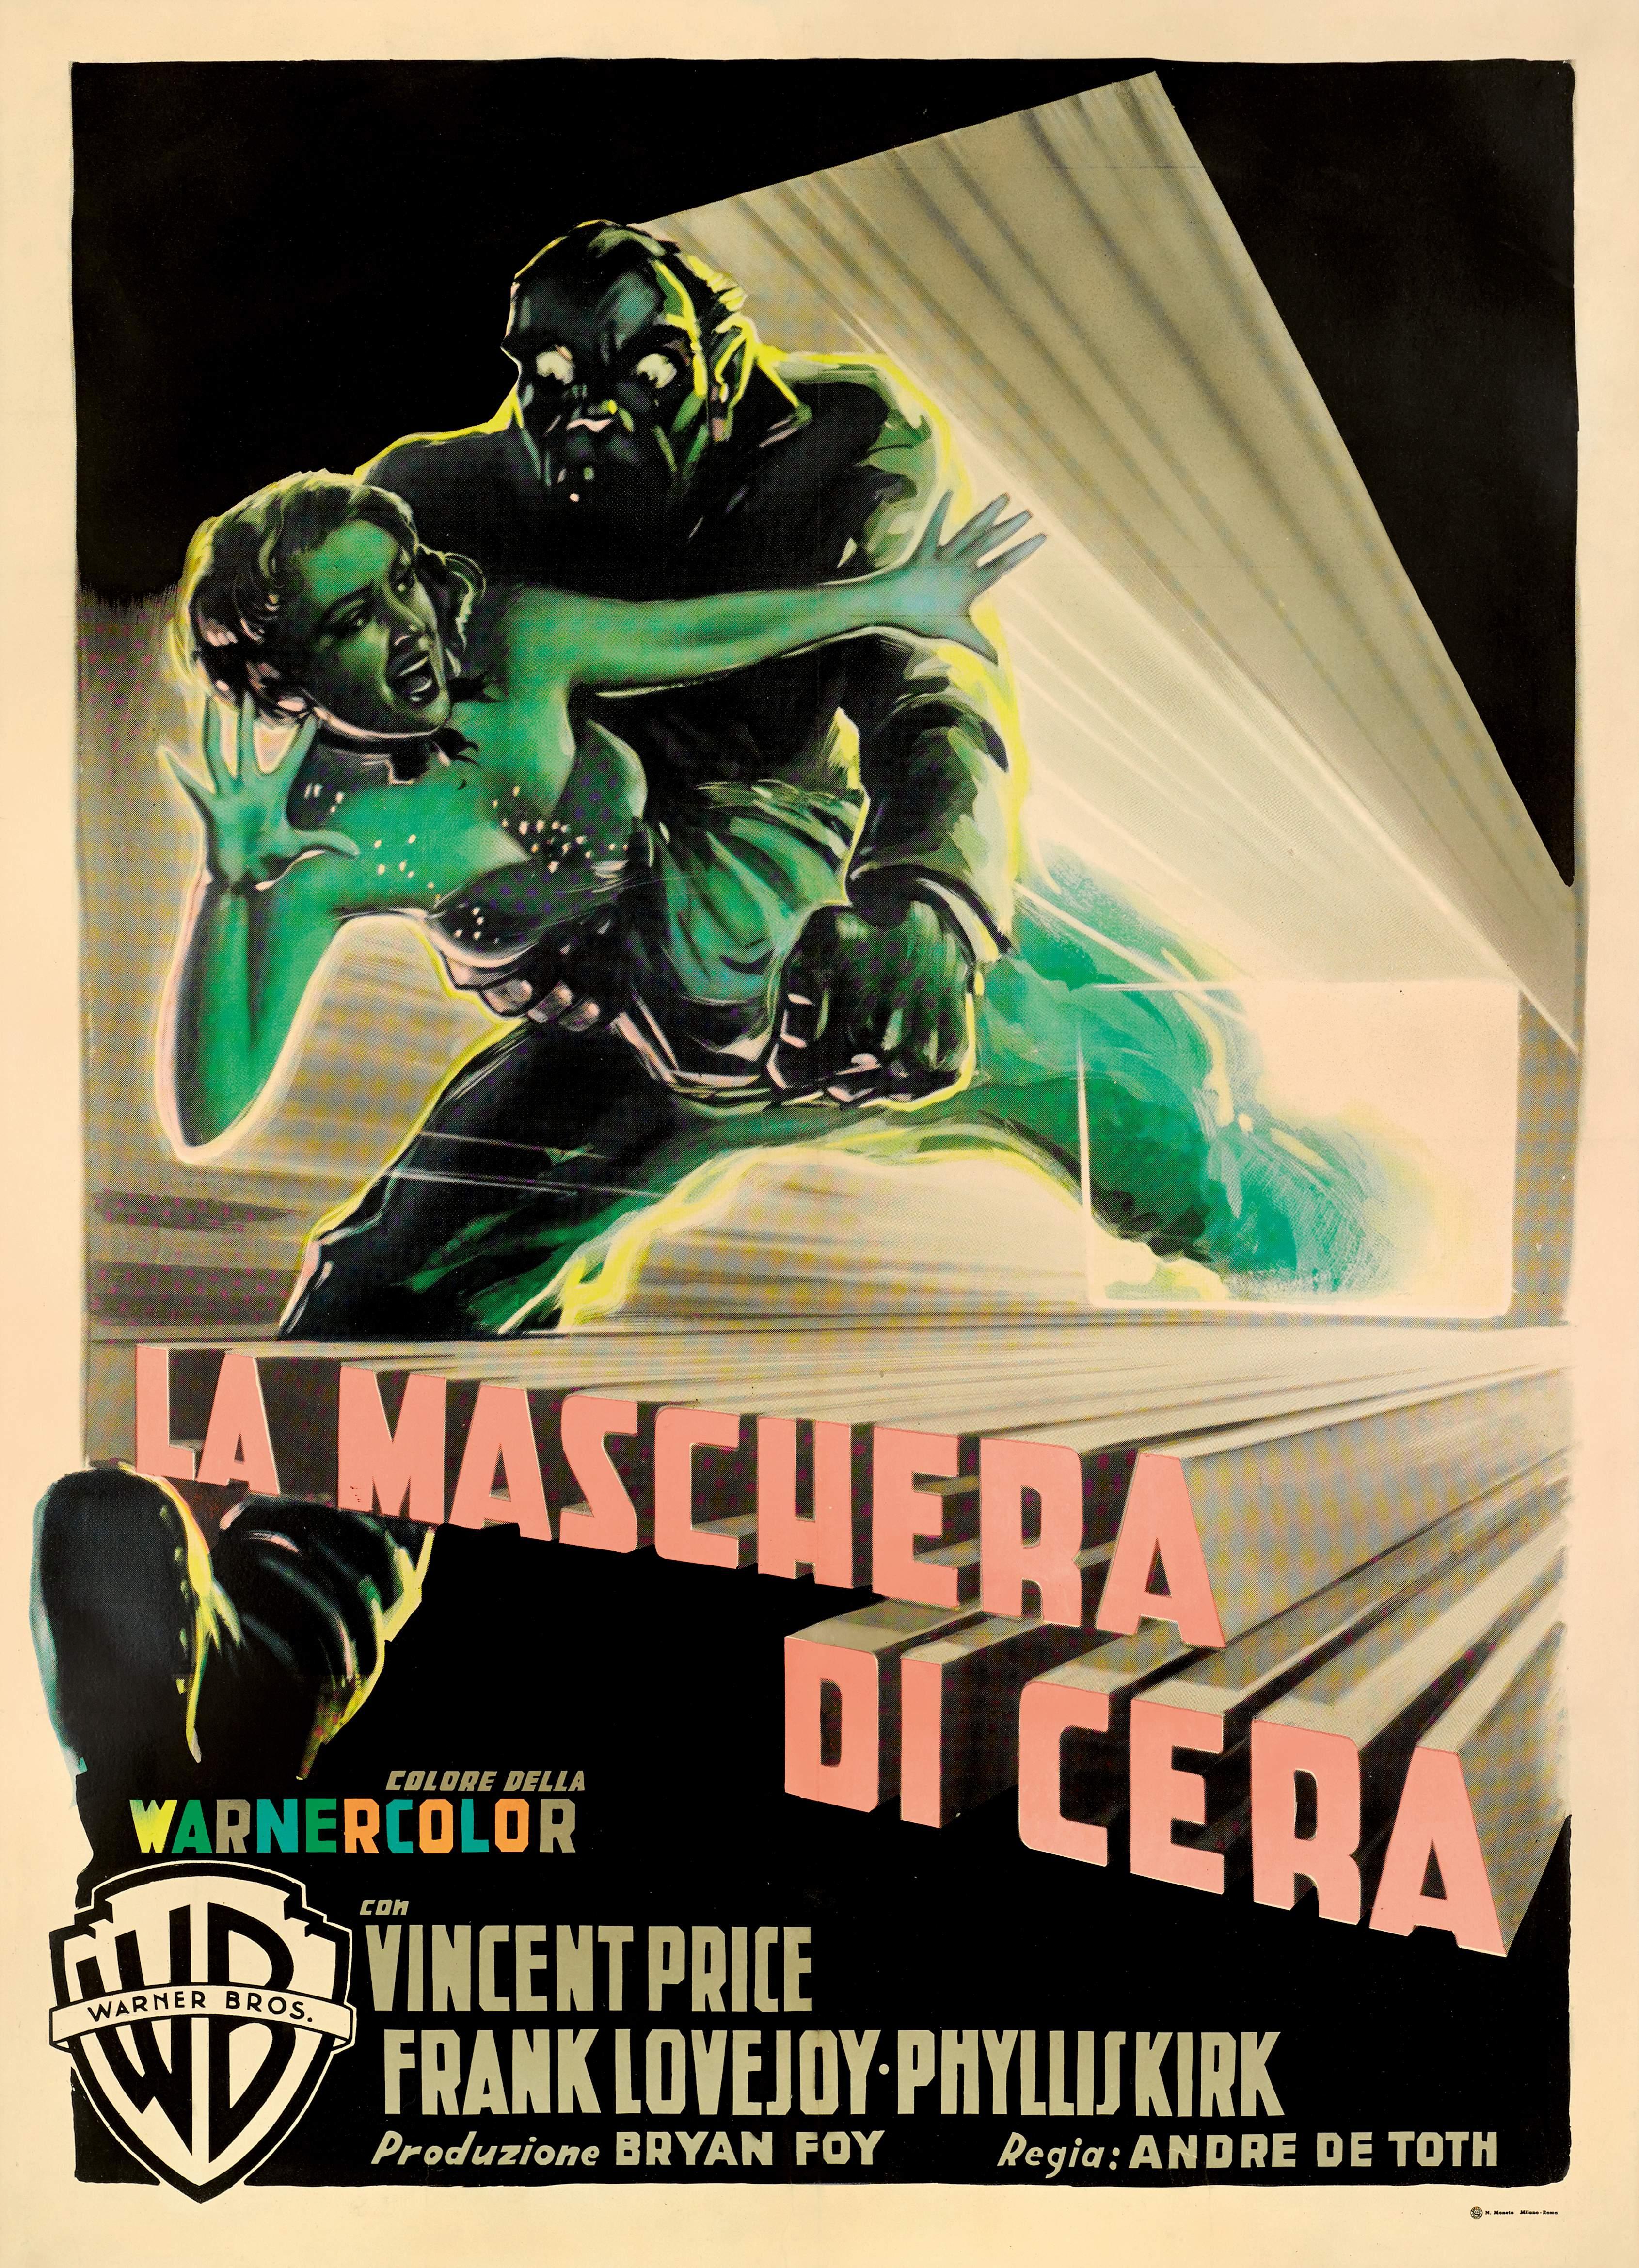 Original exceptionally rare Italian poster, that has only surfaced a few times.
This American colour 3-D horror film was directed by Andre DeToth and stars Vincent Price. It was a remake of the 1933 film Mystery of the Wax Museum. This film was the